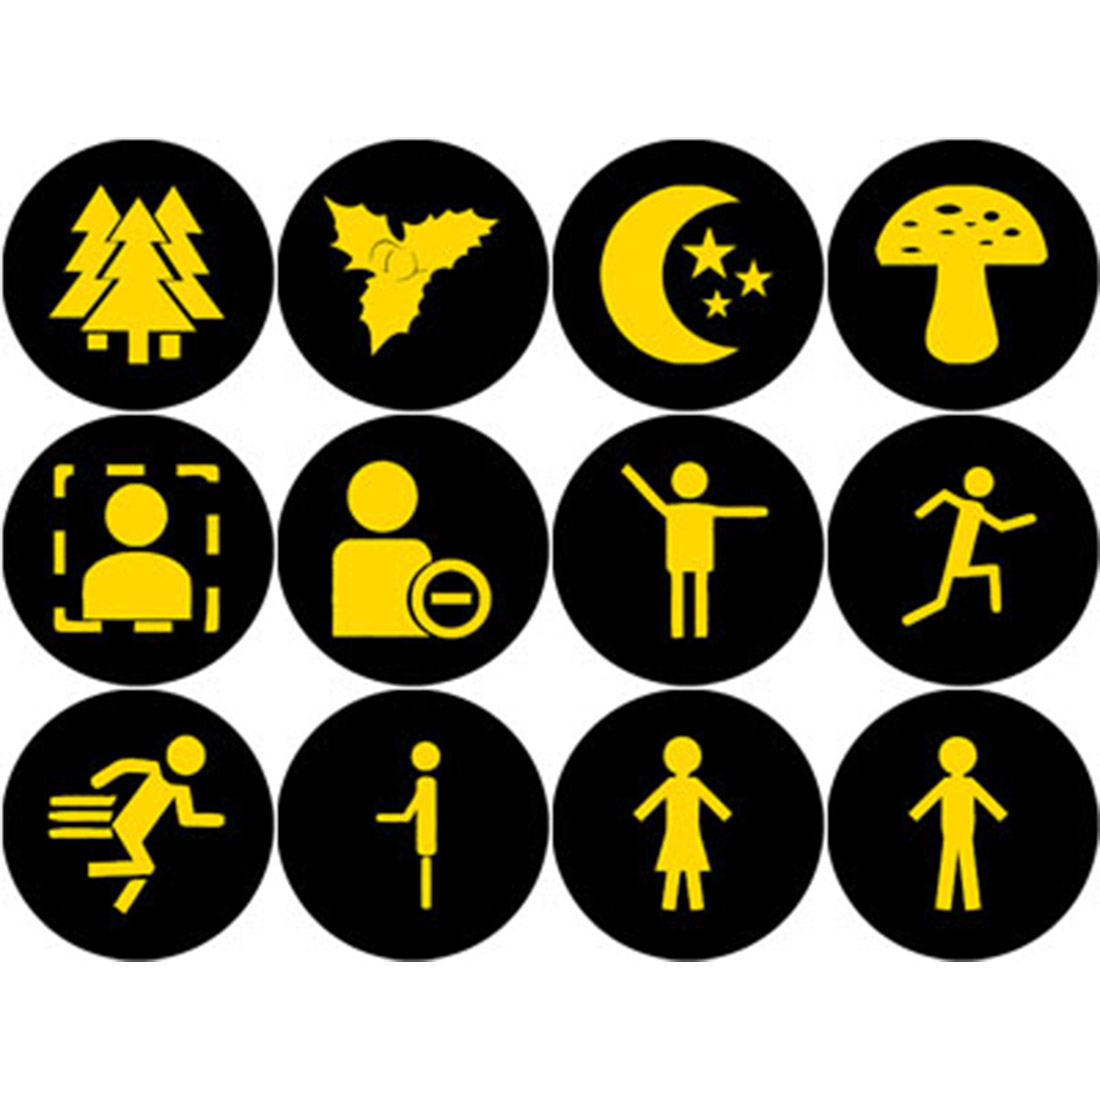 GOLD AND BLACK NATURE ROUND ICONS cover image.